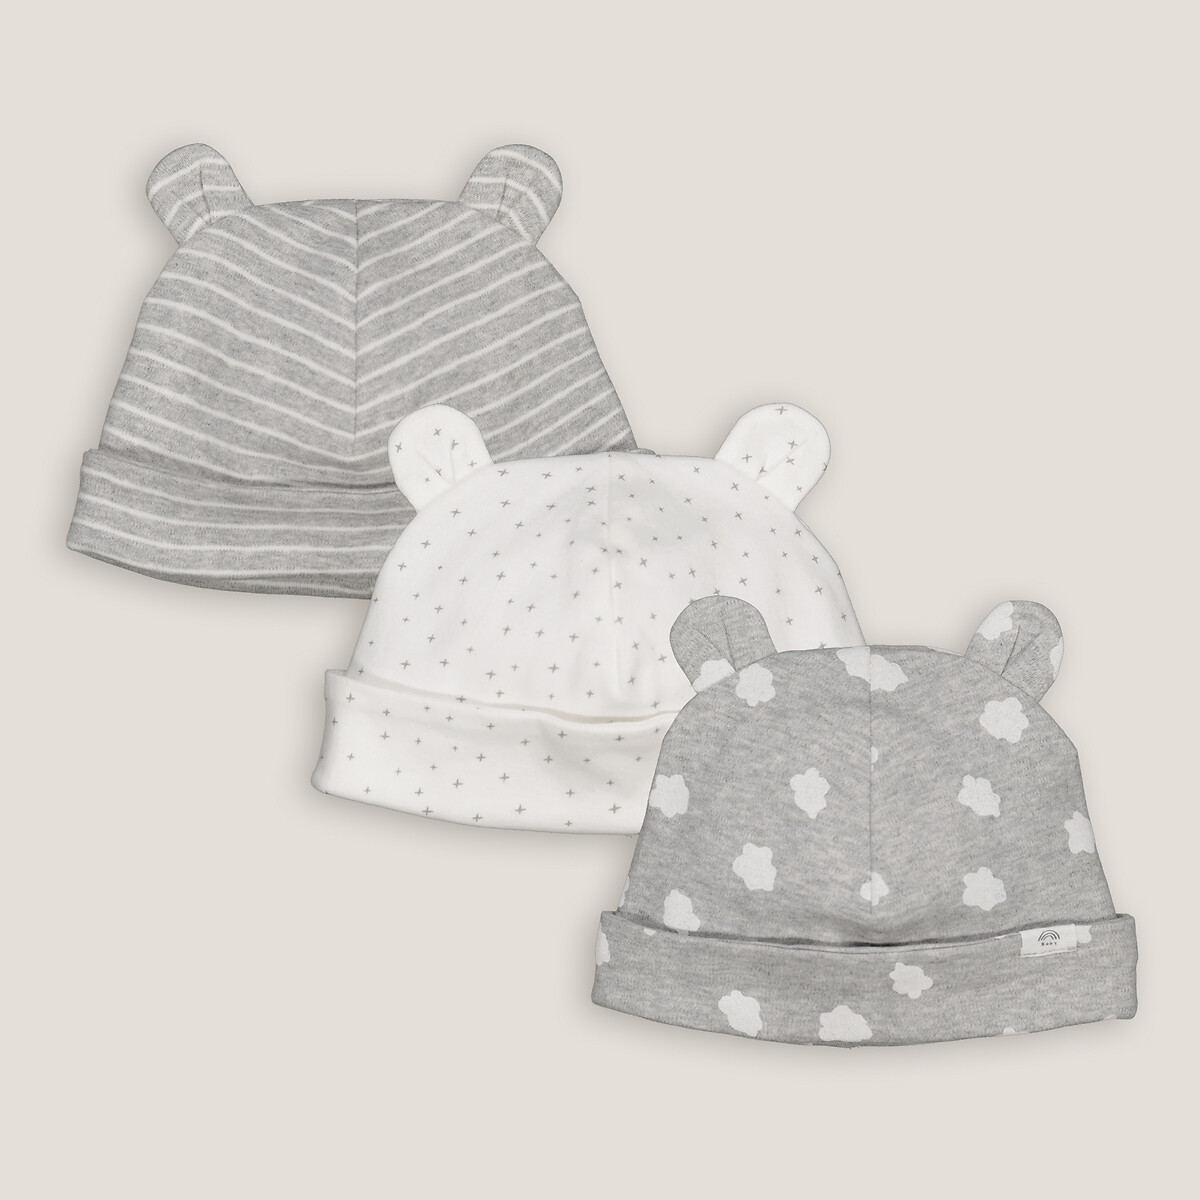 Pack of 3 Hats in Cotton